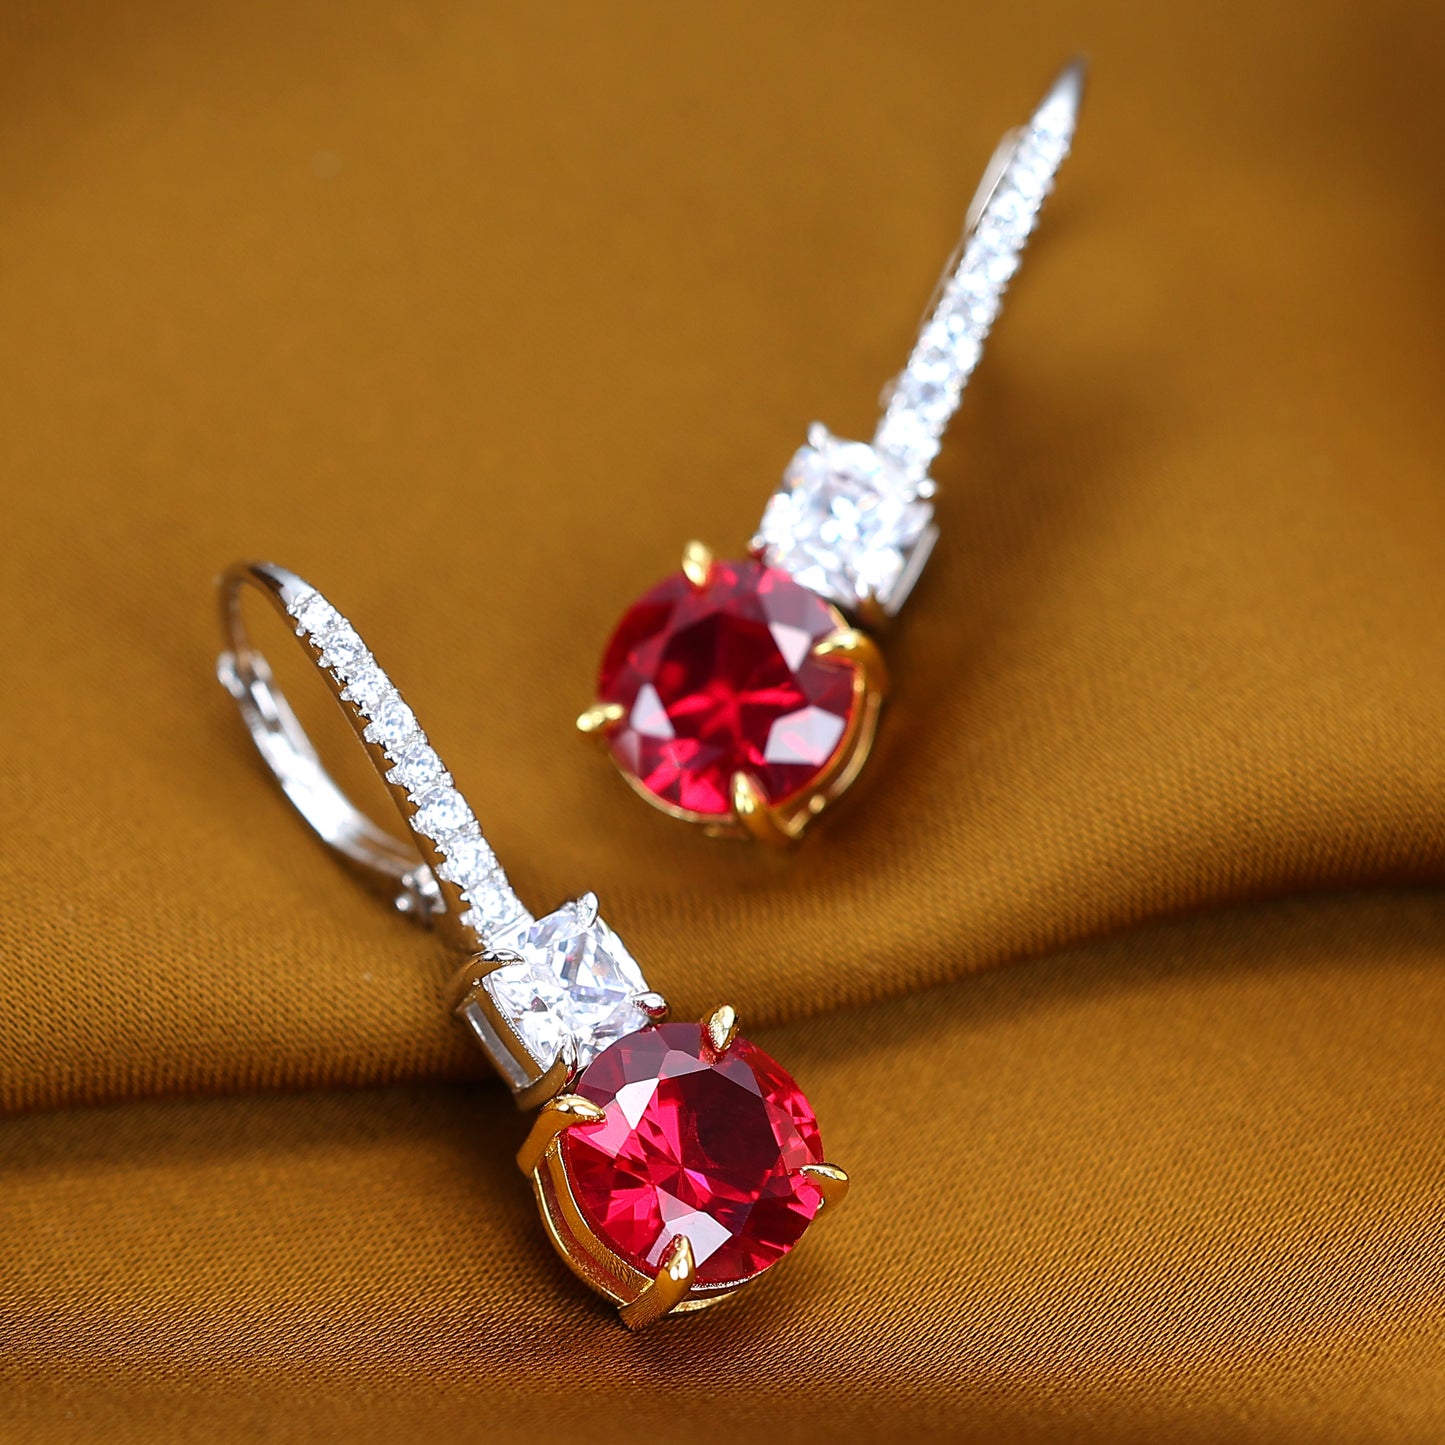 Micro-setting Ruby color round lab created stones 4 prong hook earrings, sterling silver